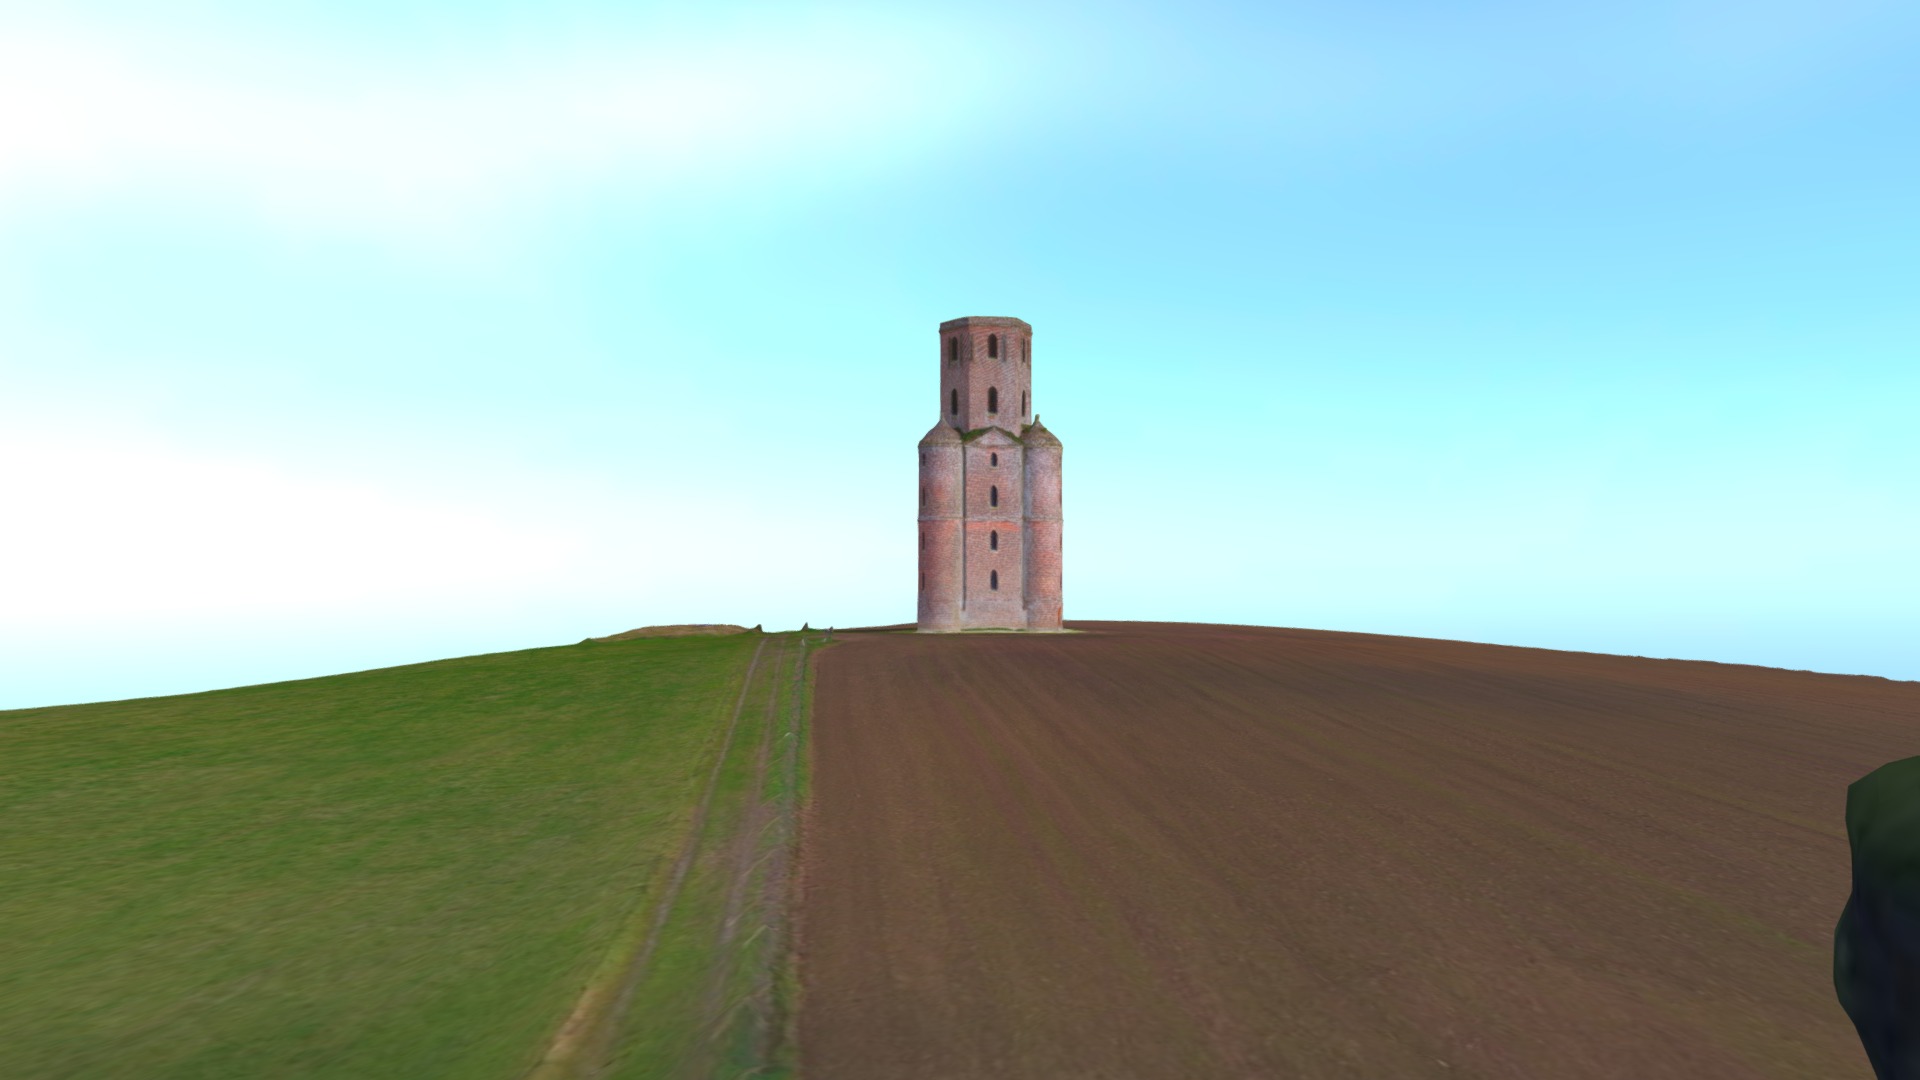 3D model Horton Tower - This is a 3D model of the Horton Tower. The 3D model is about a tower on a hill.